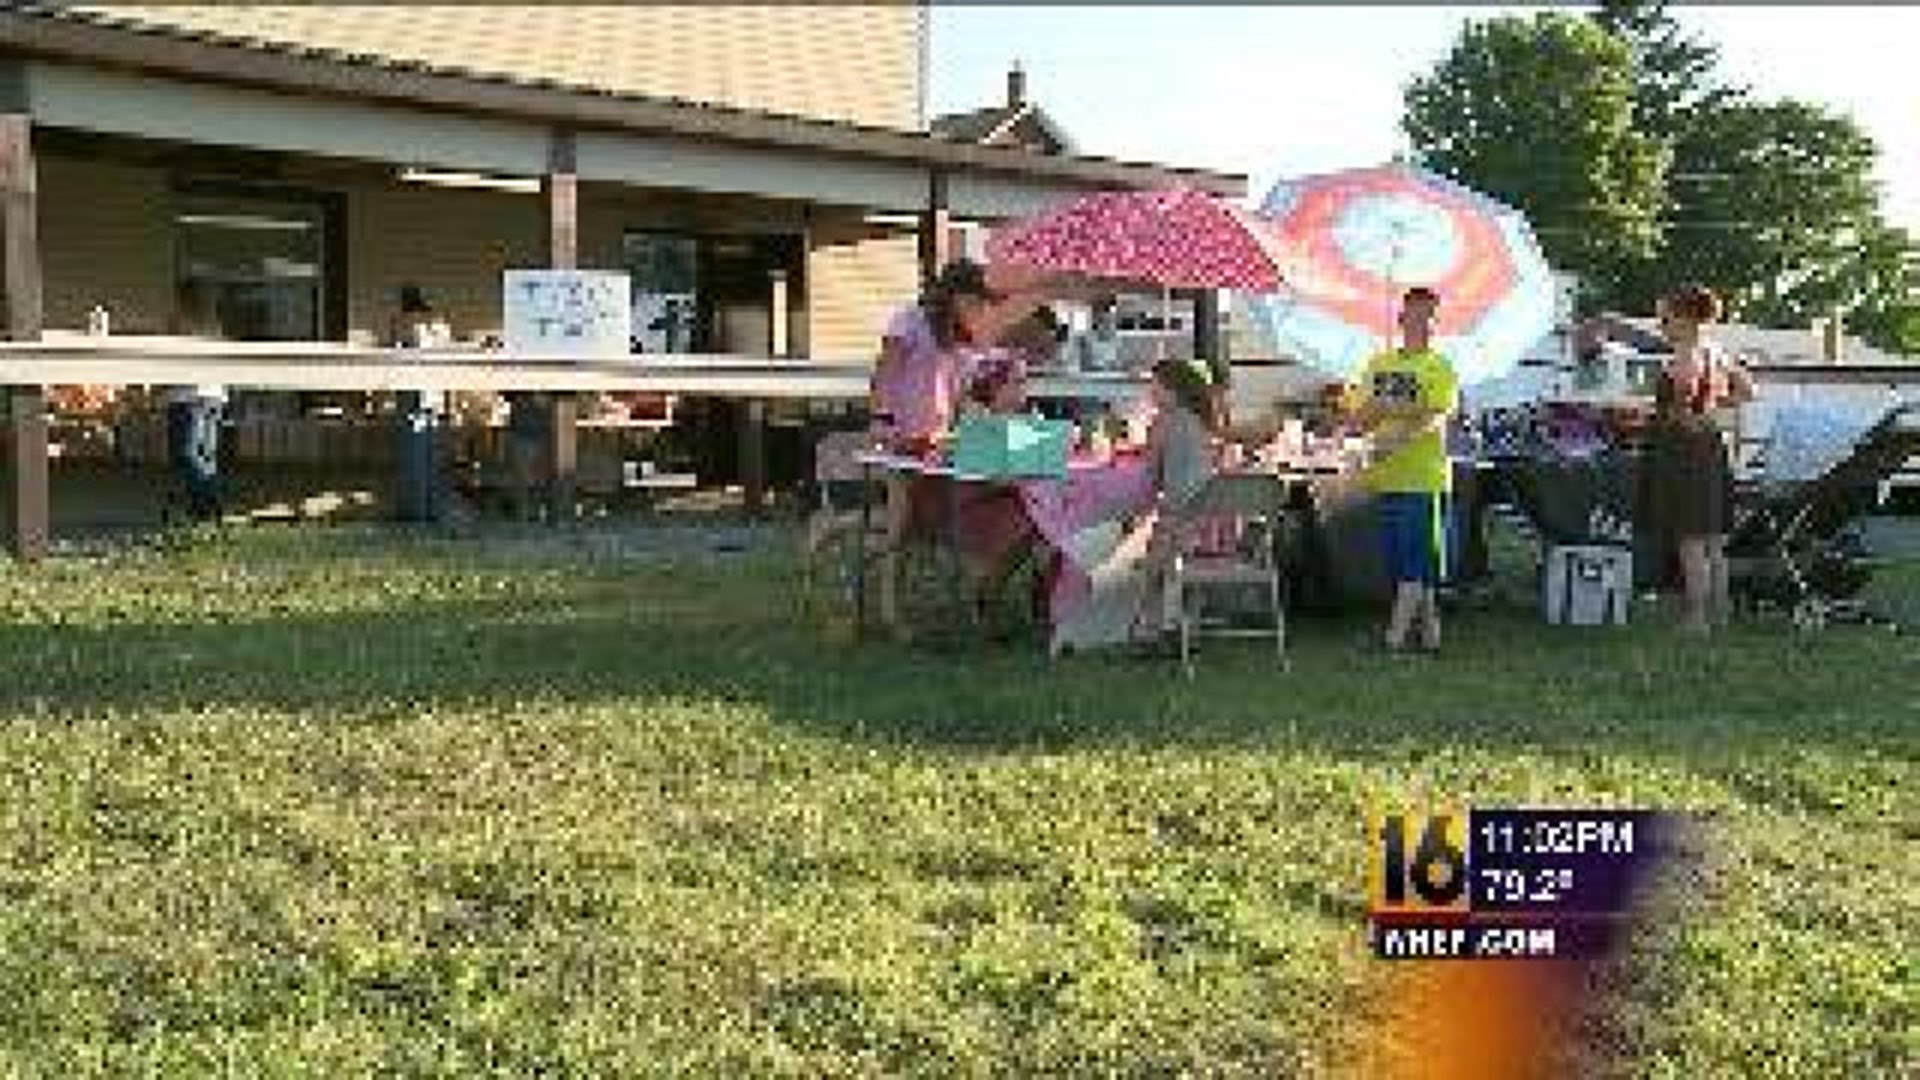 Money Reported Stolen At Benefit For Family Of Child Killed In Fire